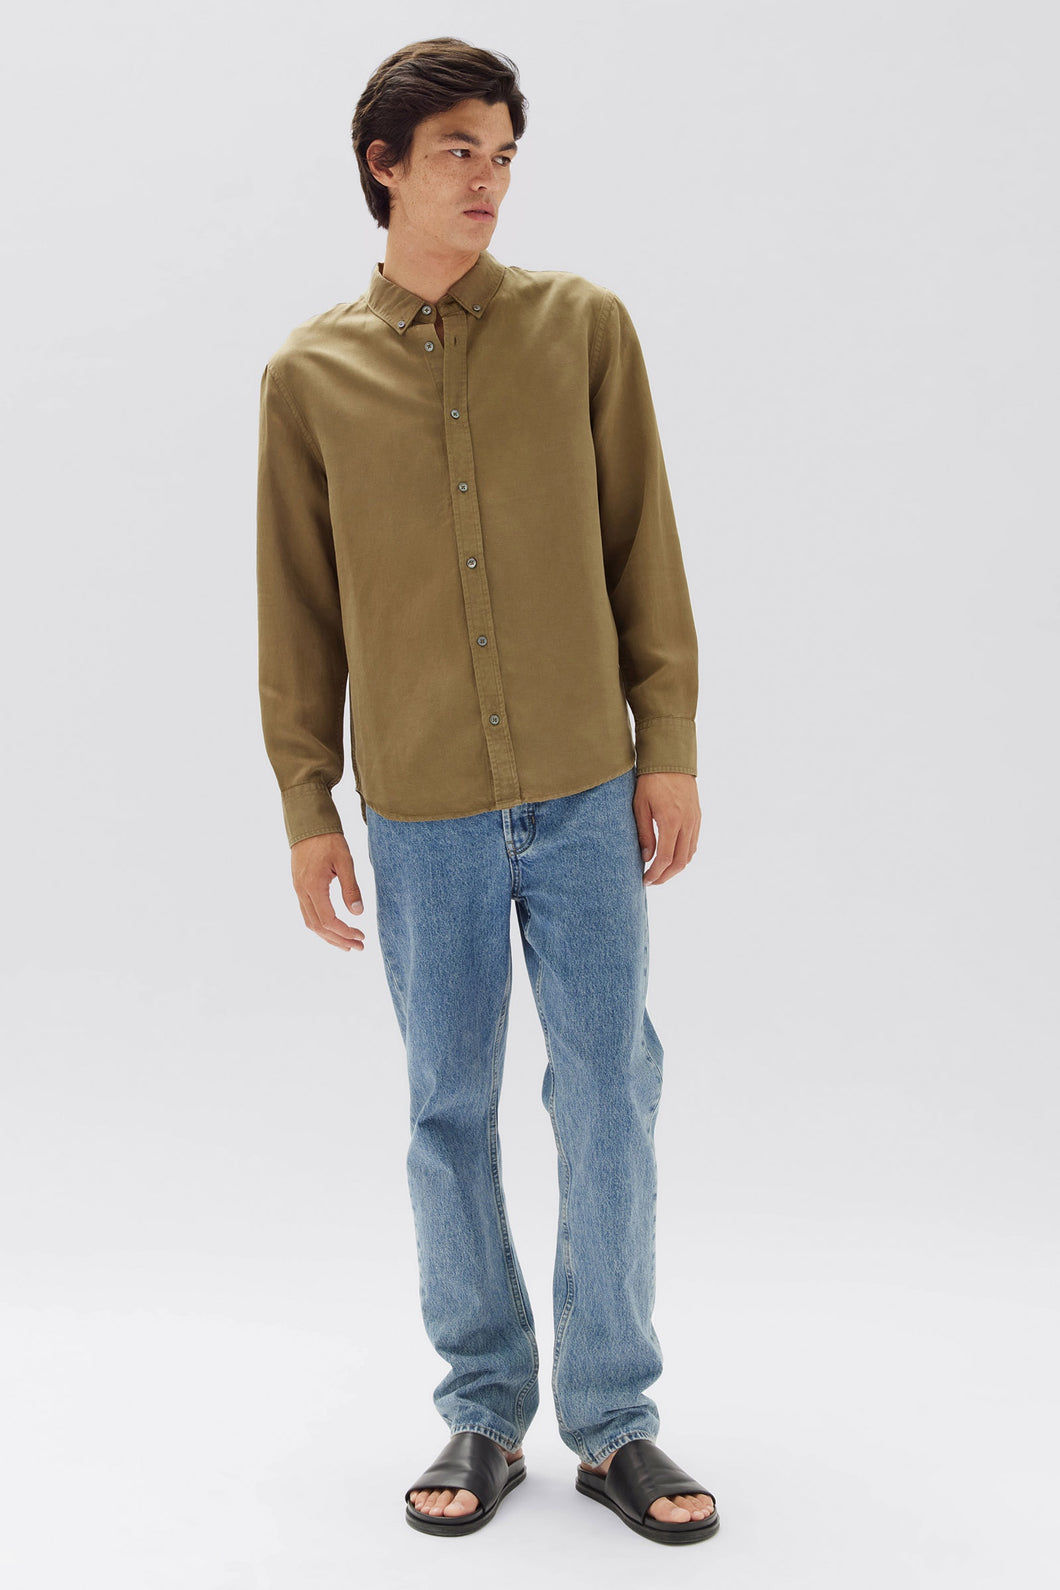 Rosco Long Sleeve Shirt - Pea-ASSEMBLY LABEL-P&K The General Store